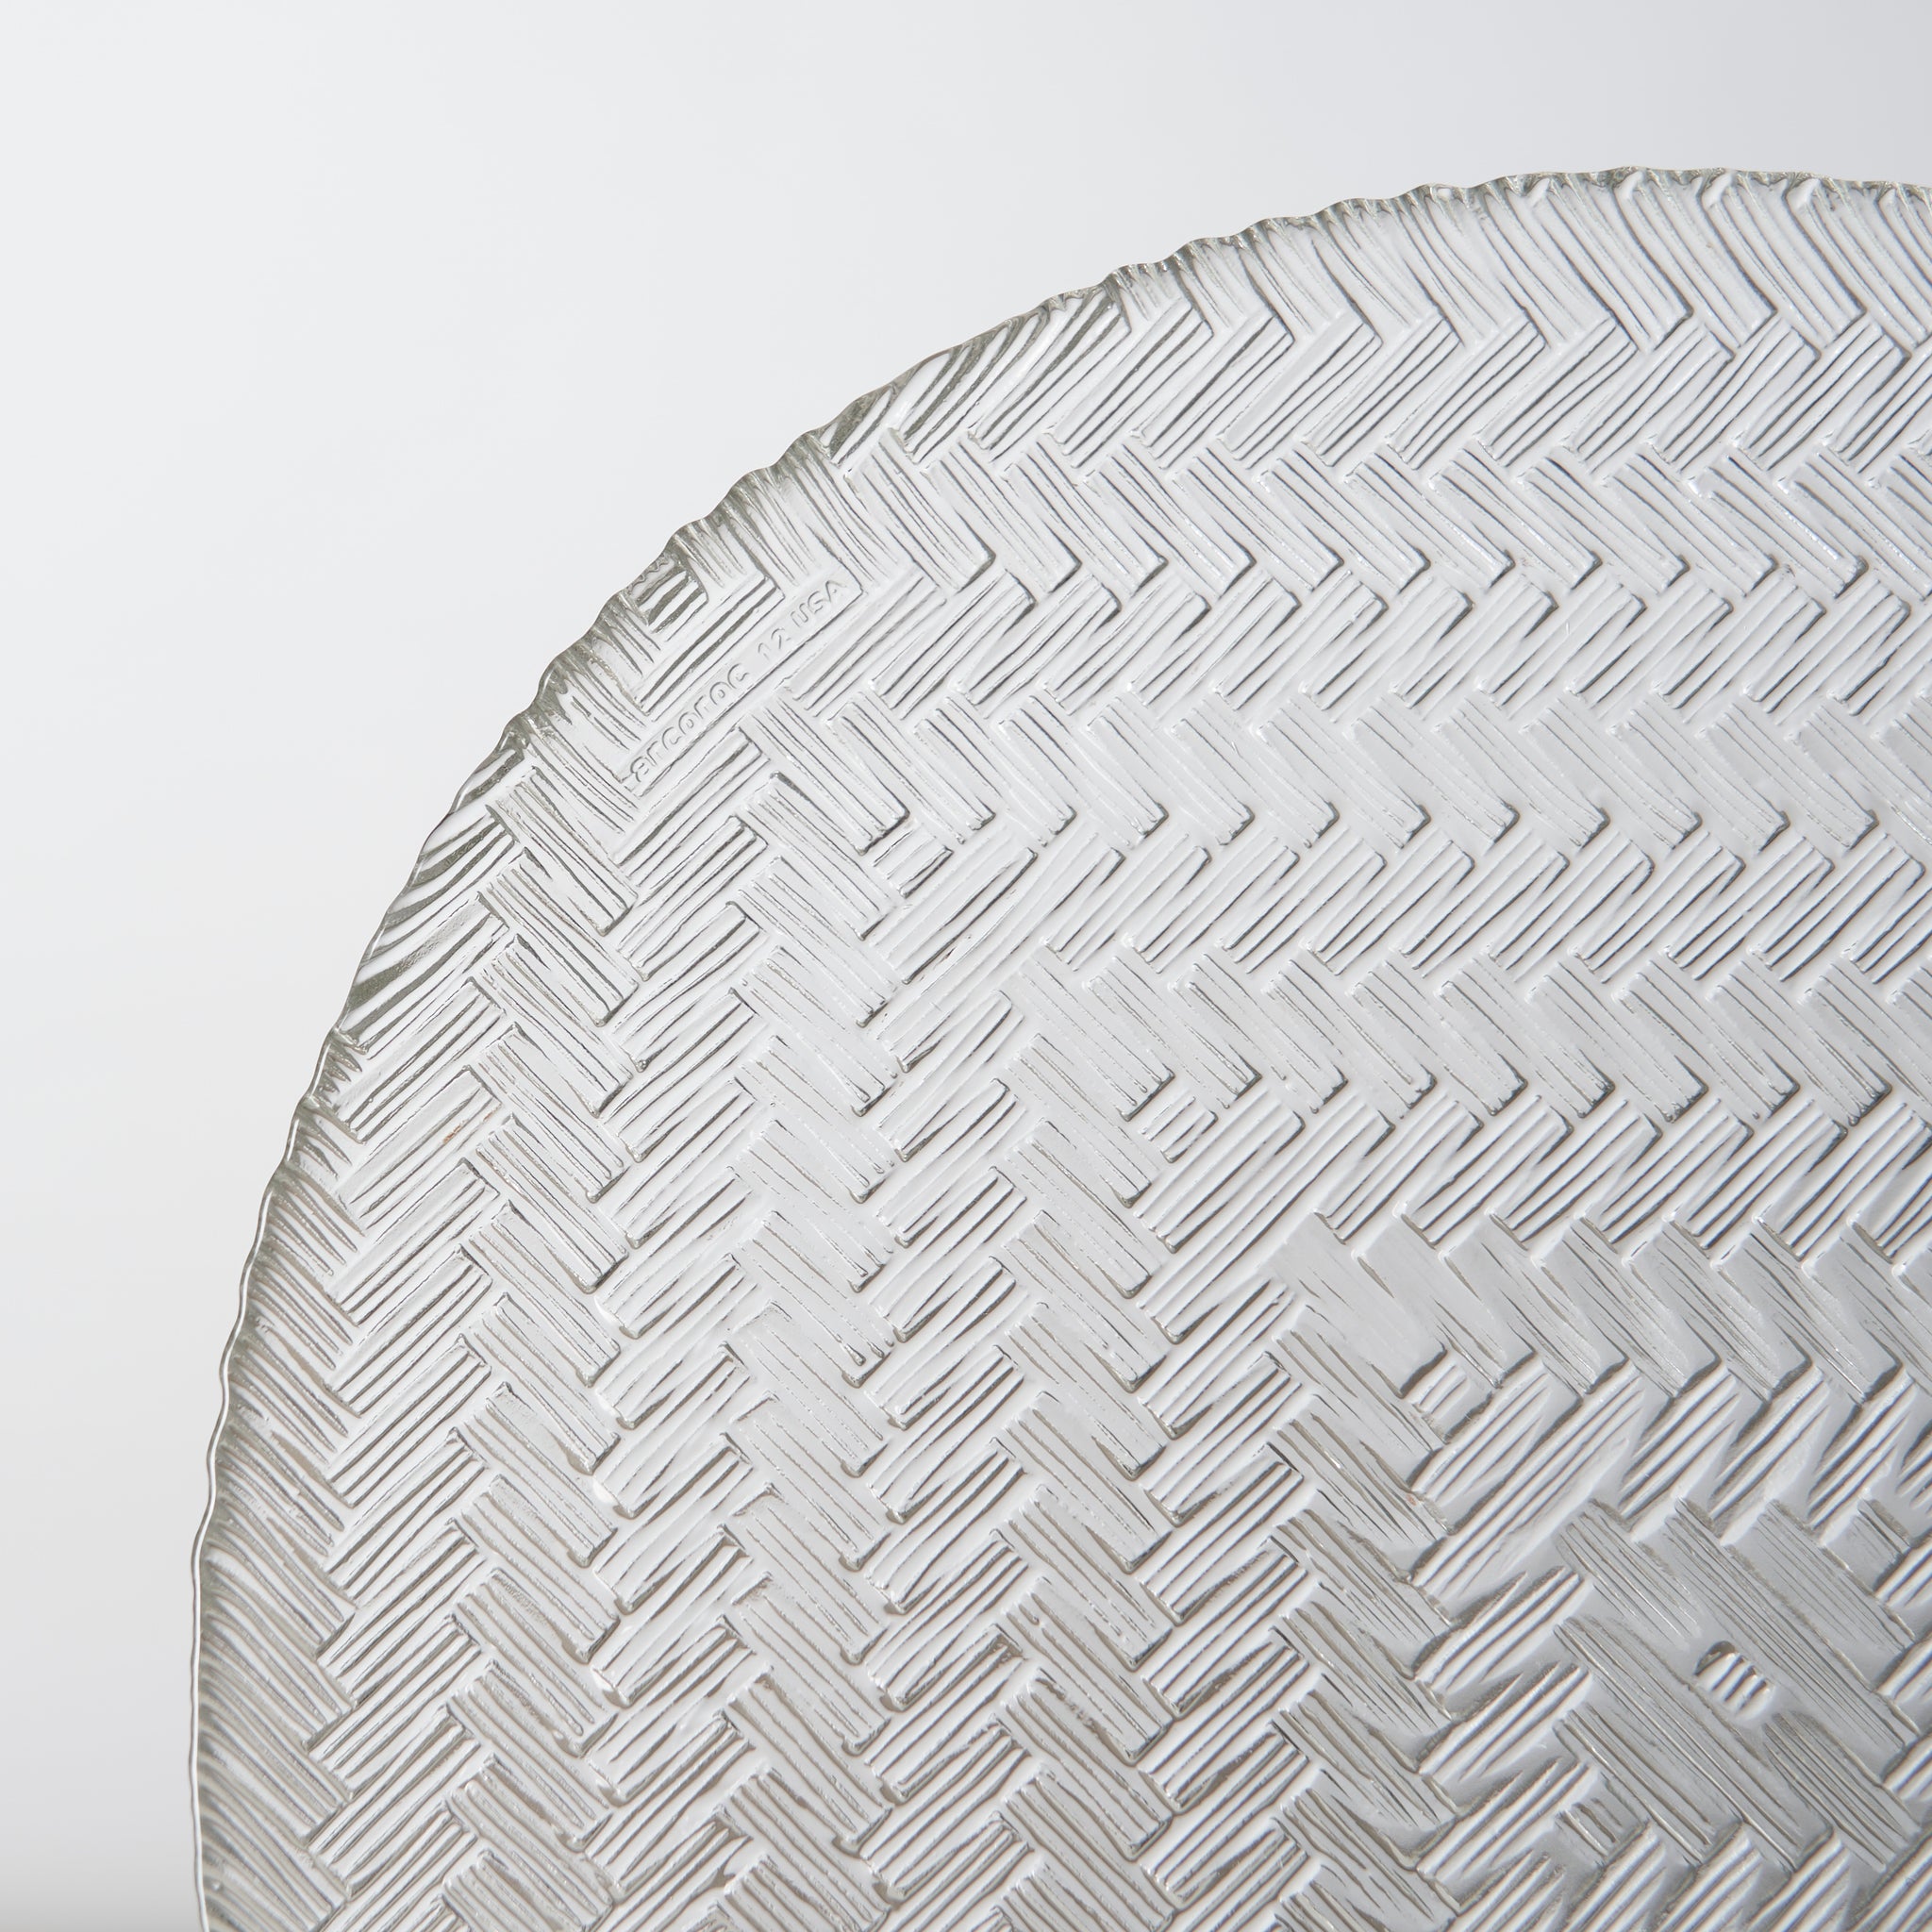 Vintage Textured Glass Plate by Arcoroc